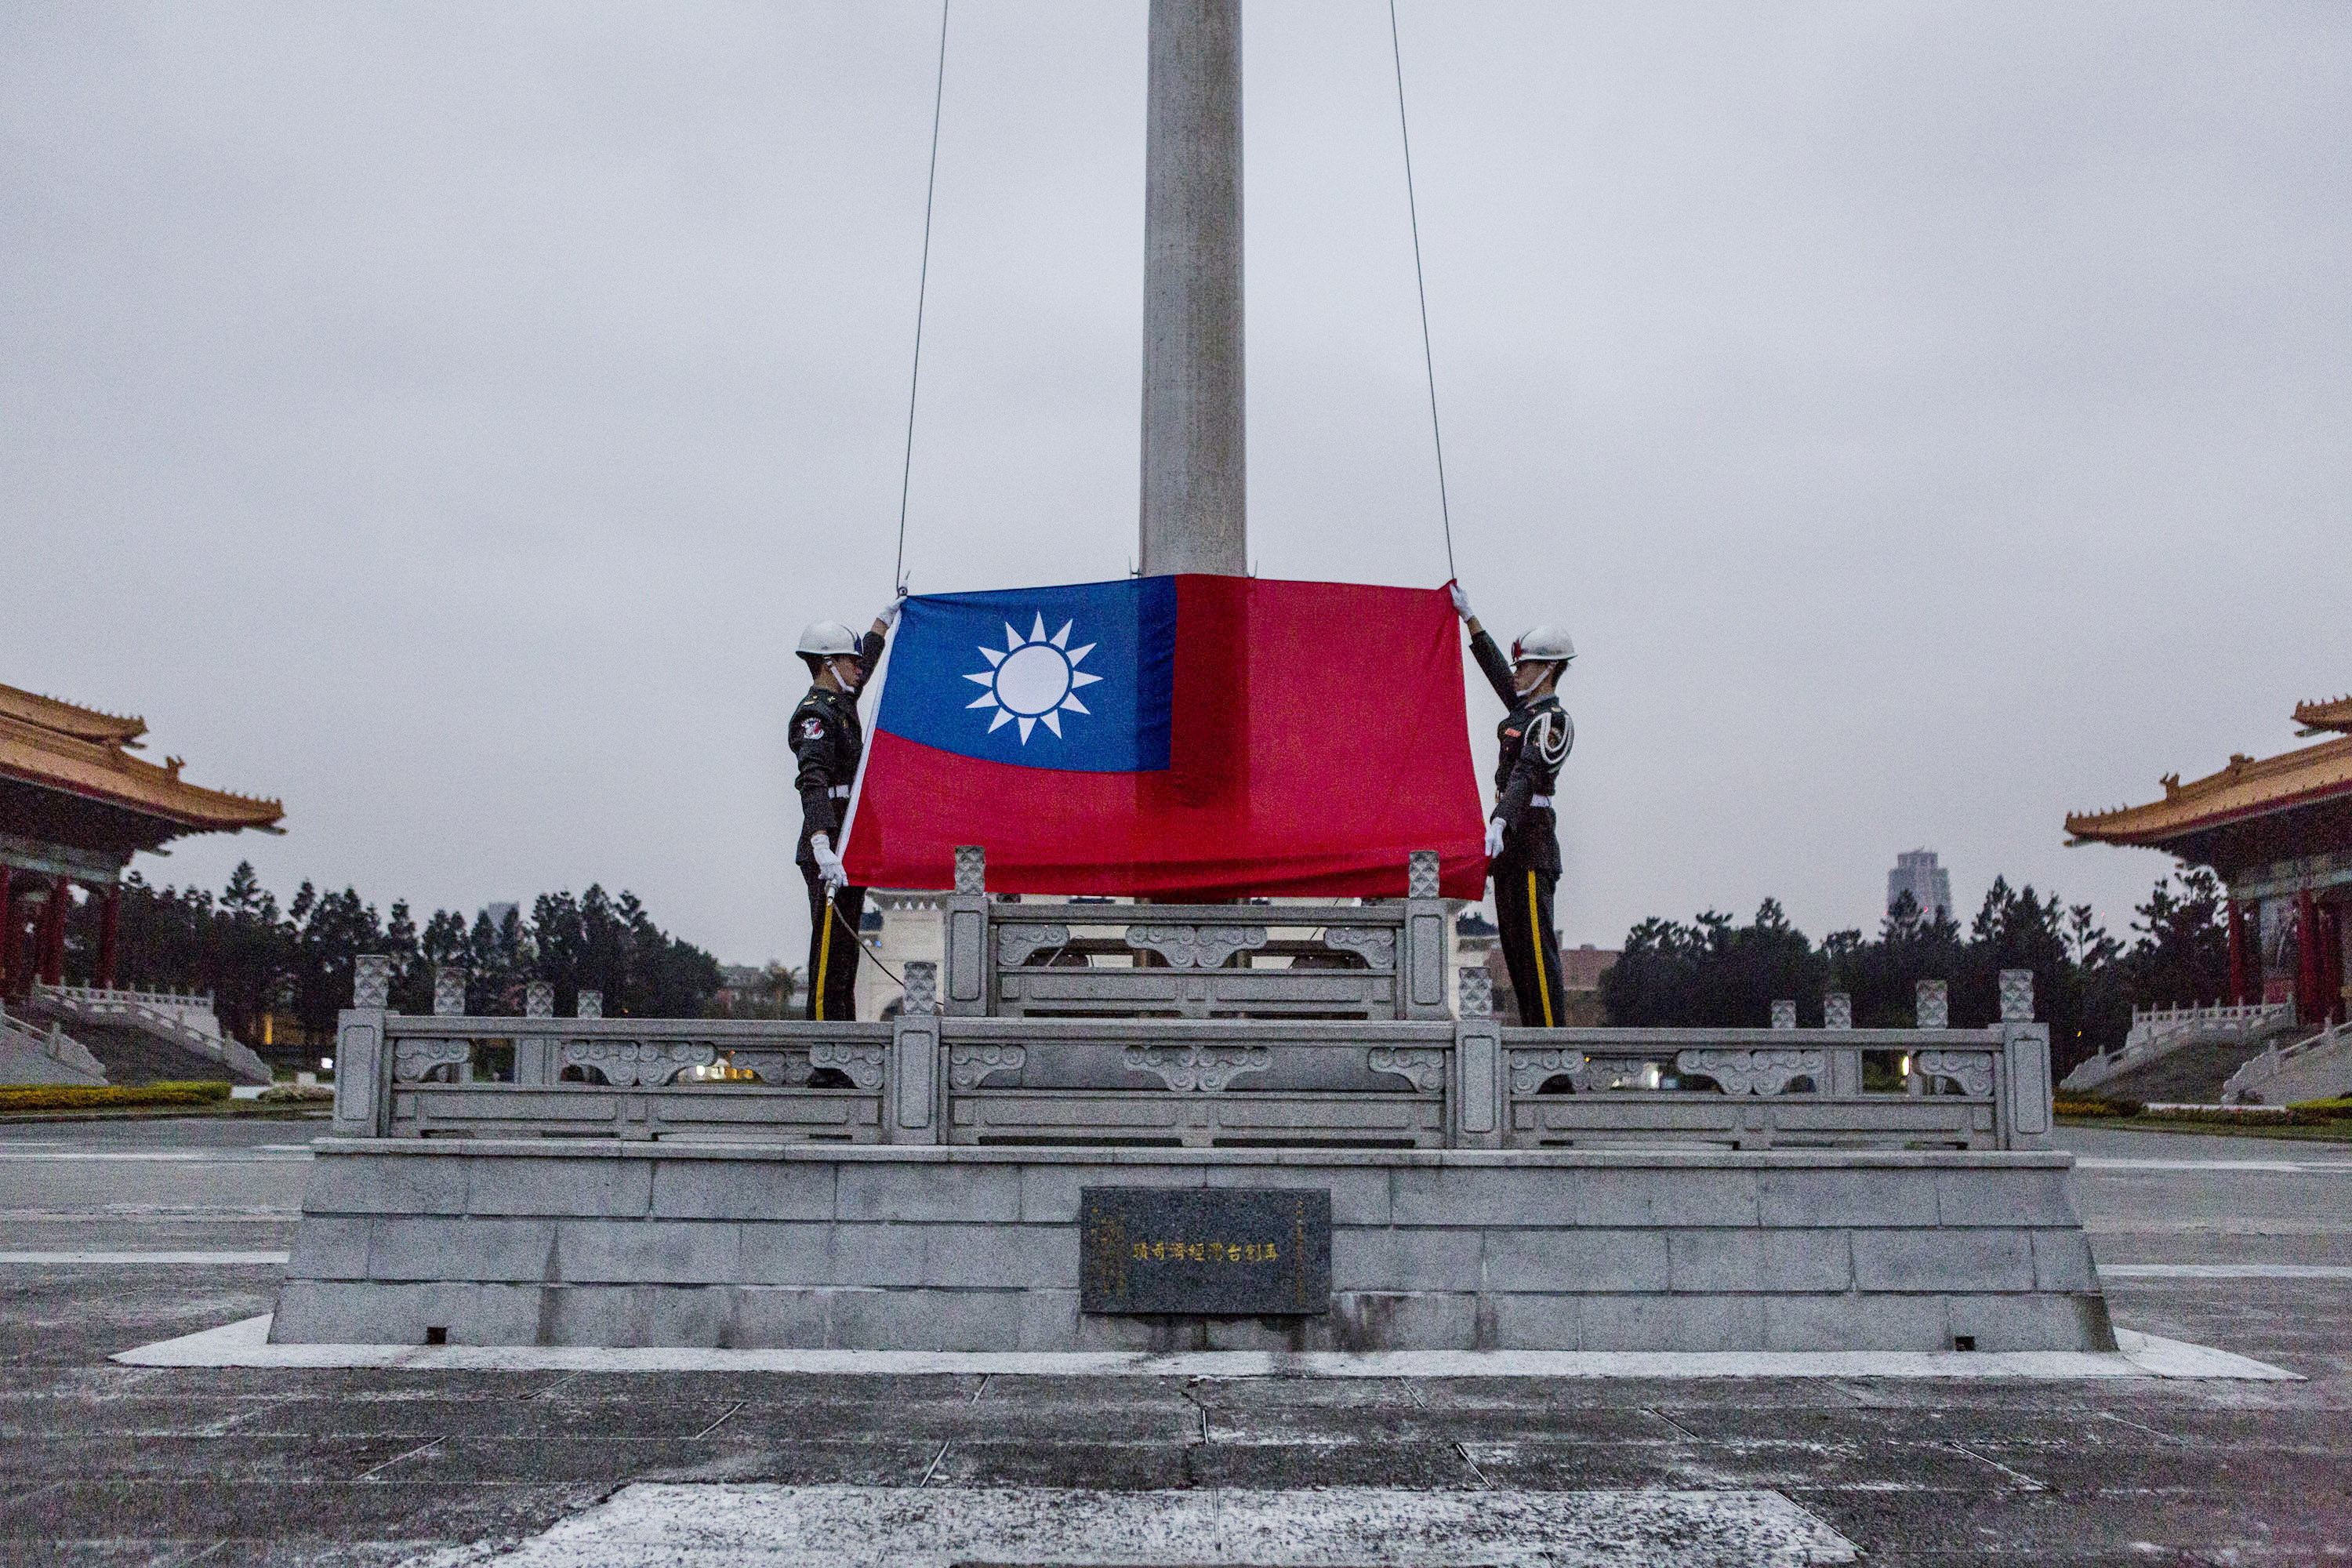 Honor guards prepare to raise the Taiwan flag in the Chiang Kai-shek Memorial Hall Square in Taipei on Jan. 14, 2016, ahead of the Taiwanese presidential election (Ulet Ifansasti—Getty Images)